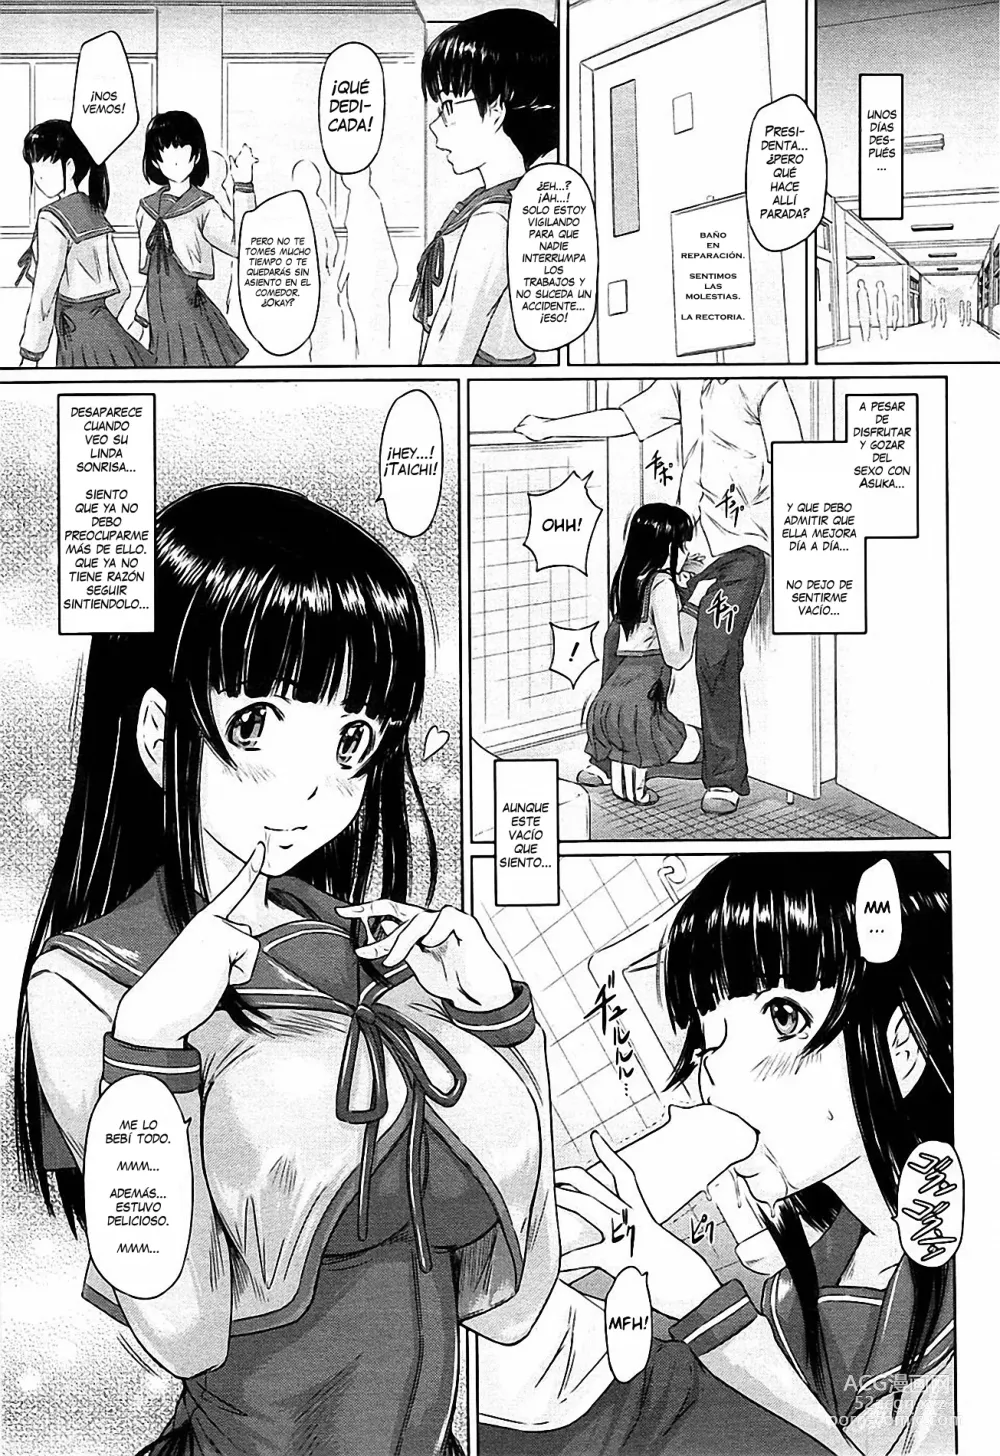 Page 23 of manga Curiosity Never Stops.